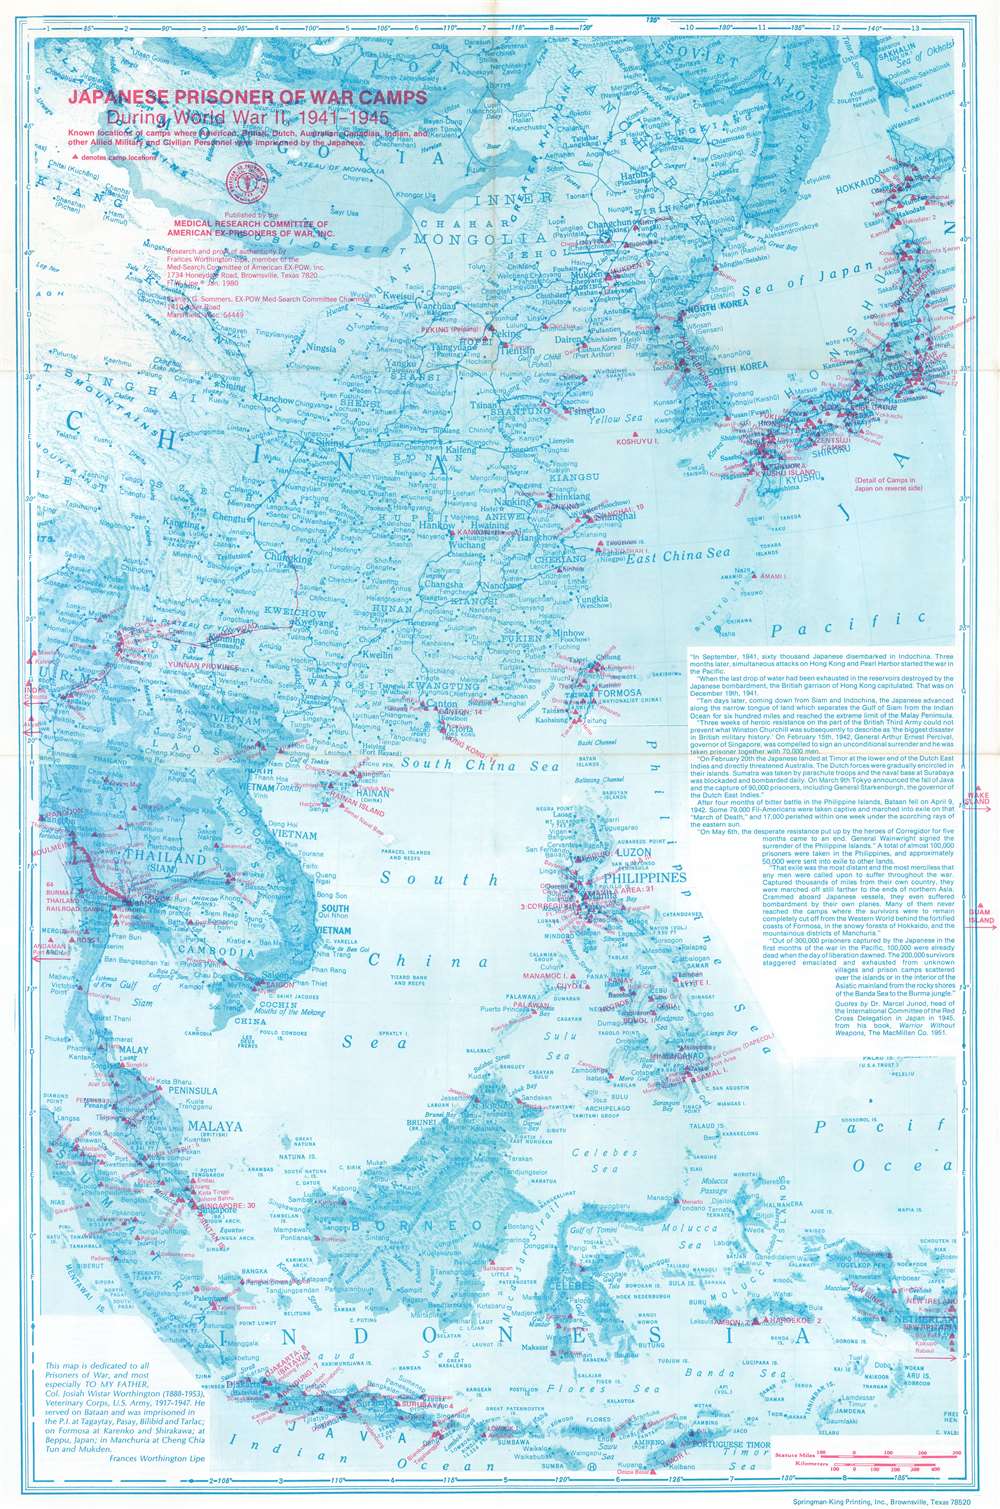 Japanese Prisoner of War Camps During World War II, 1941 - 1945. Known locations of camps where American, British, Dutch, Australian, Canadian, Indian, and other Allied Military and Civilian Personnel were imprisoned by the Japanese. - Main View